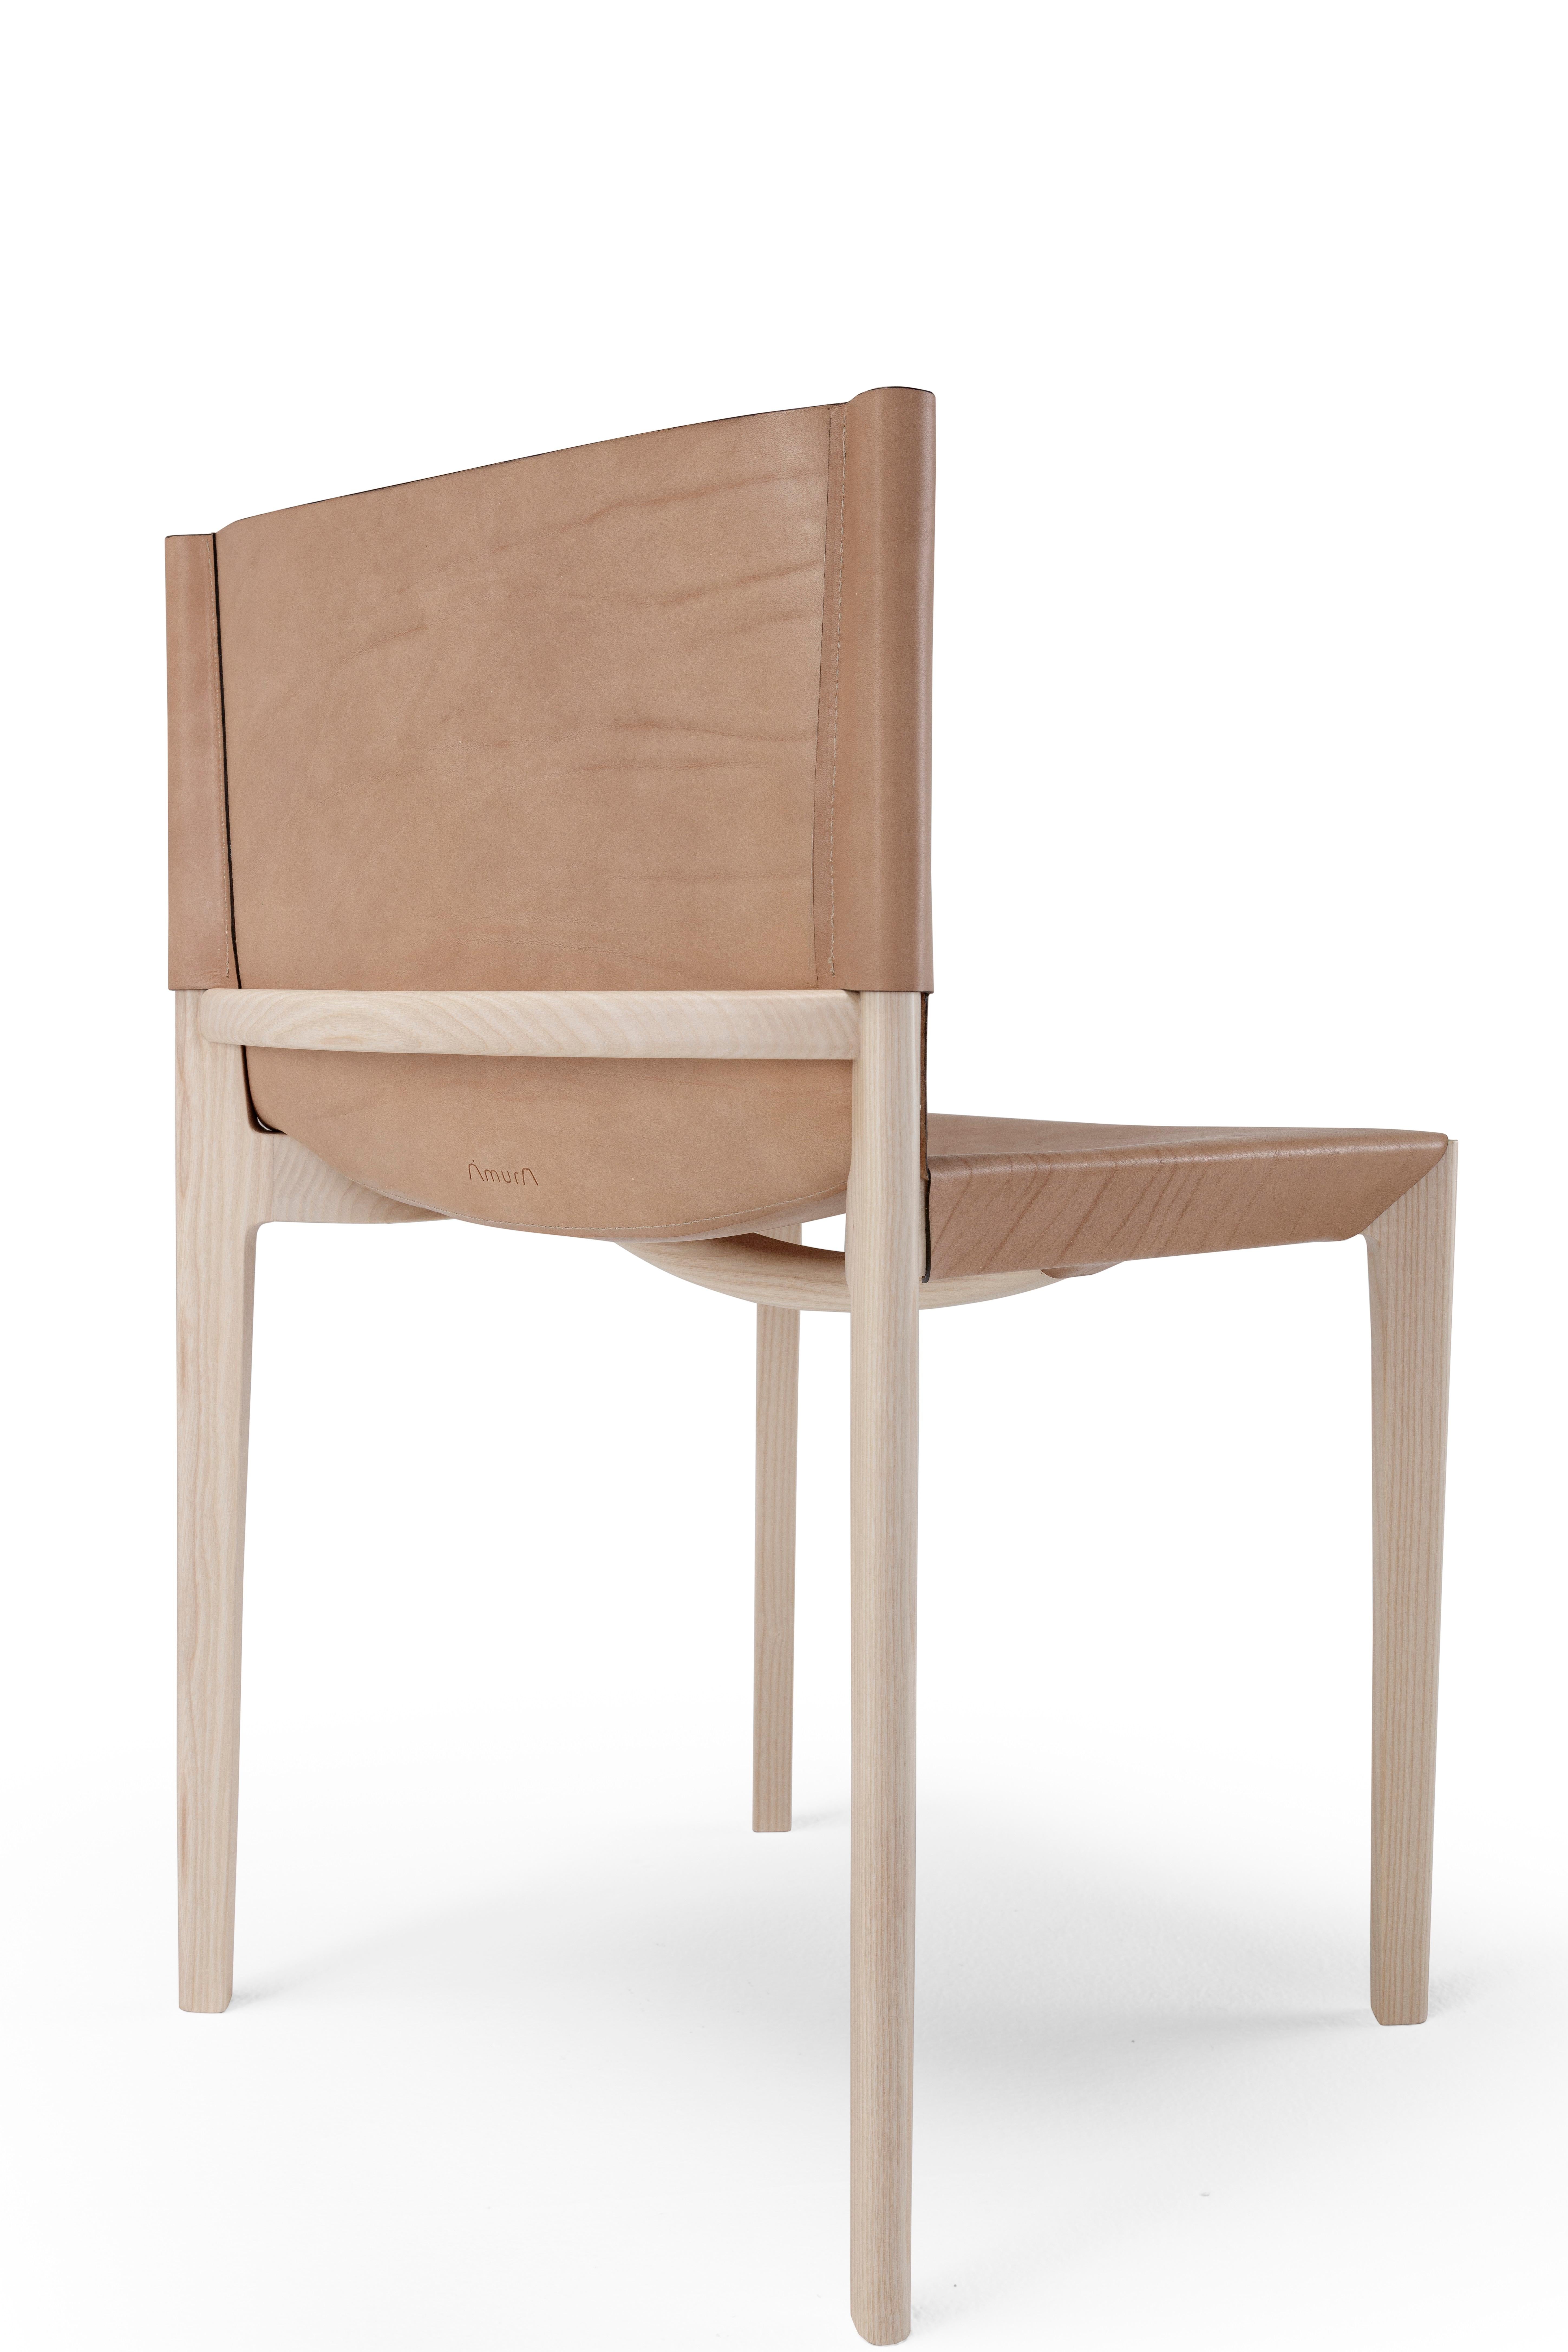 Contemporary Wooden Chair 'Stilt', Cuoio Leather For Sale 2